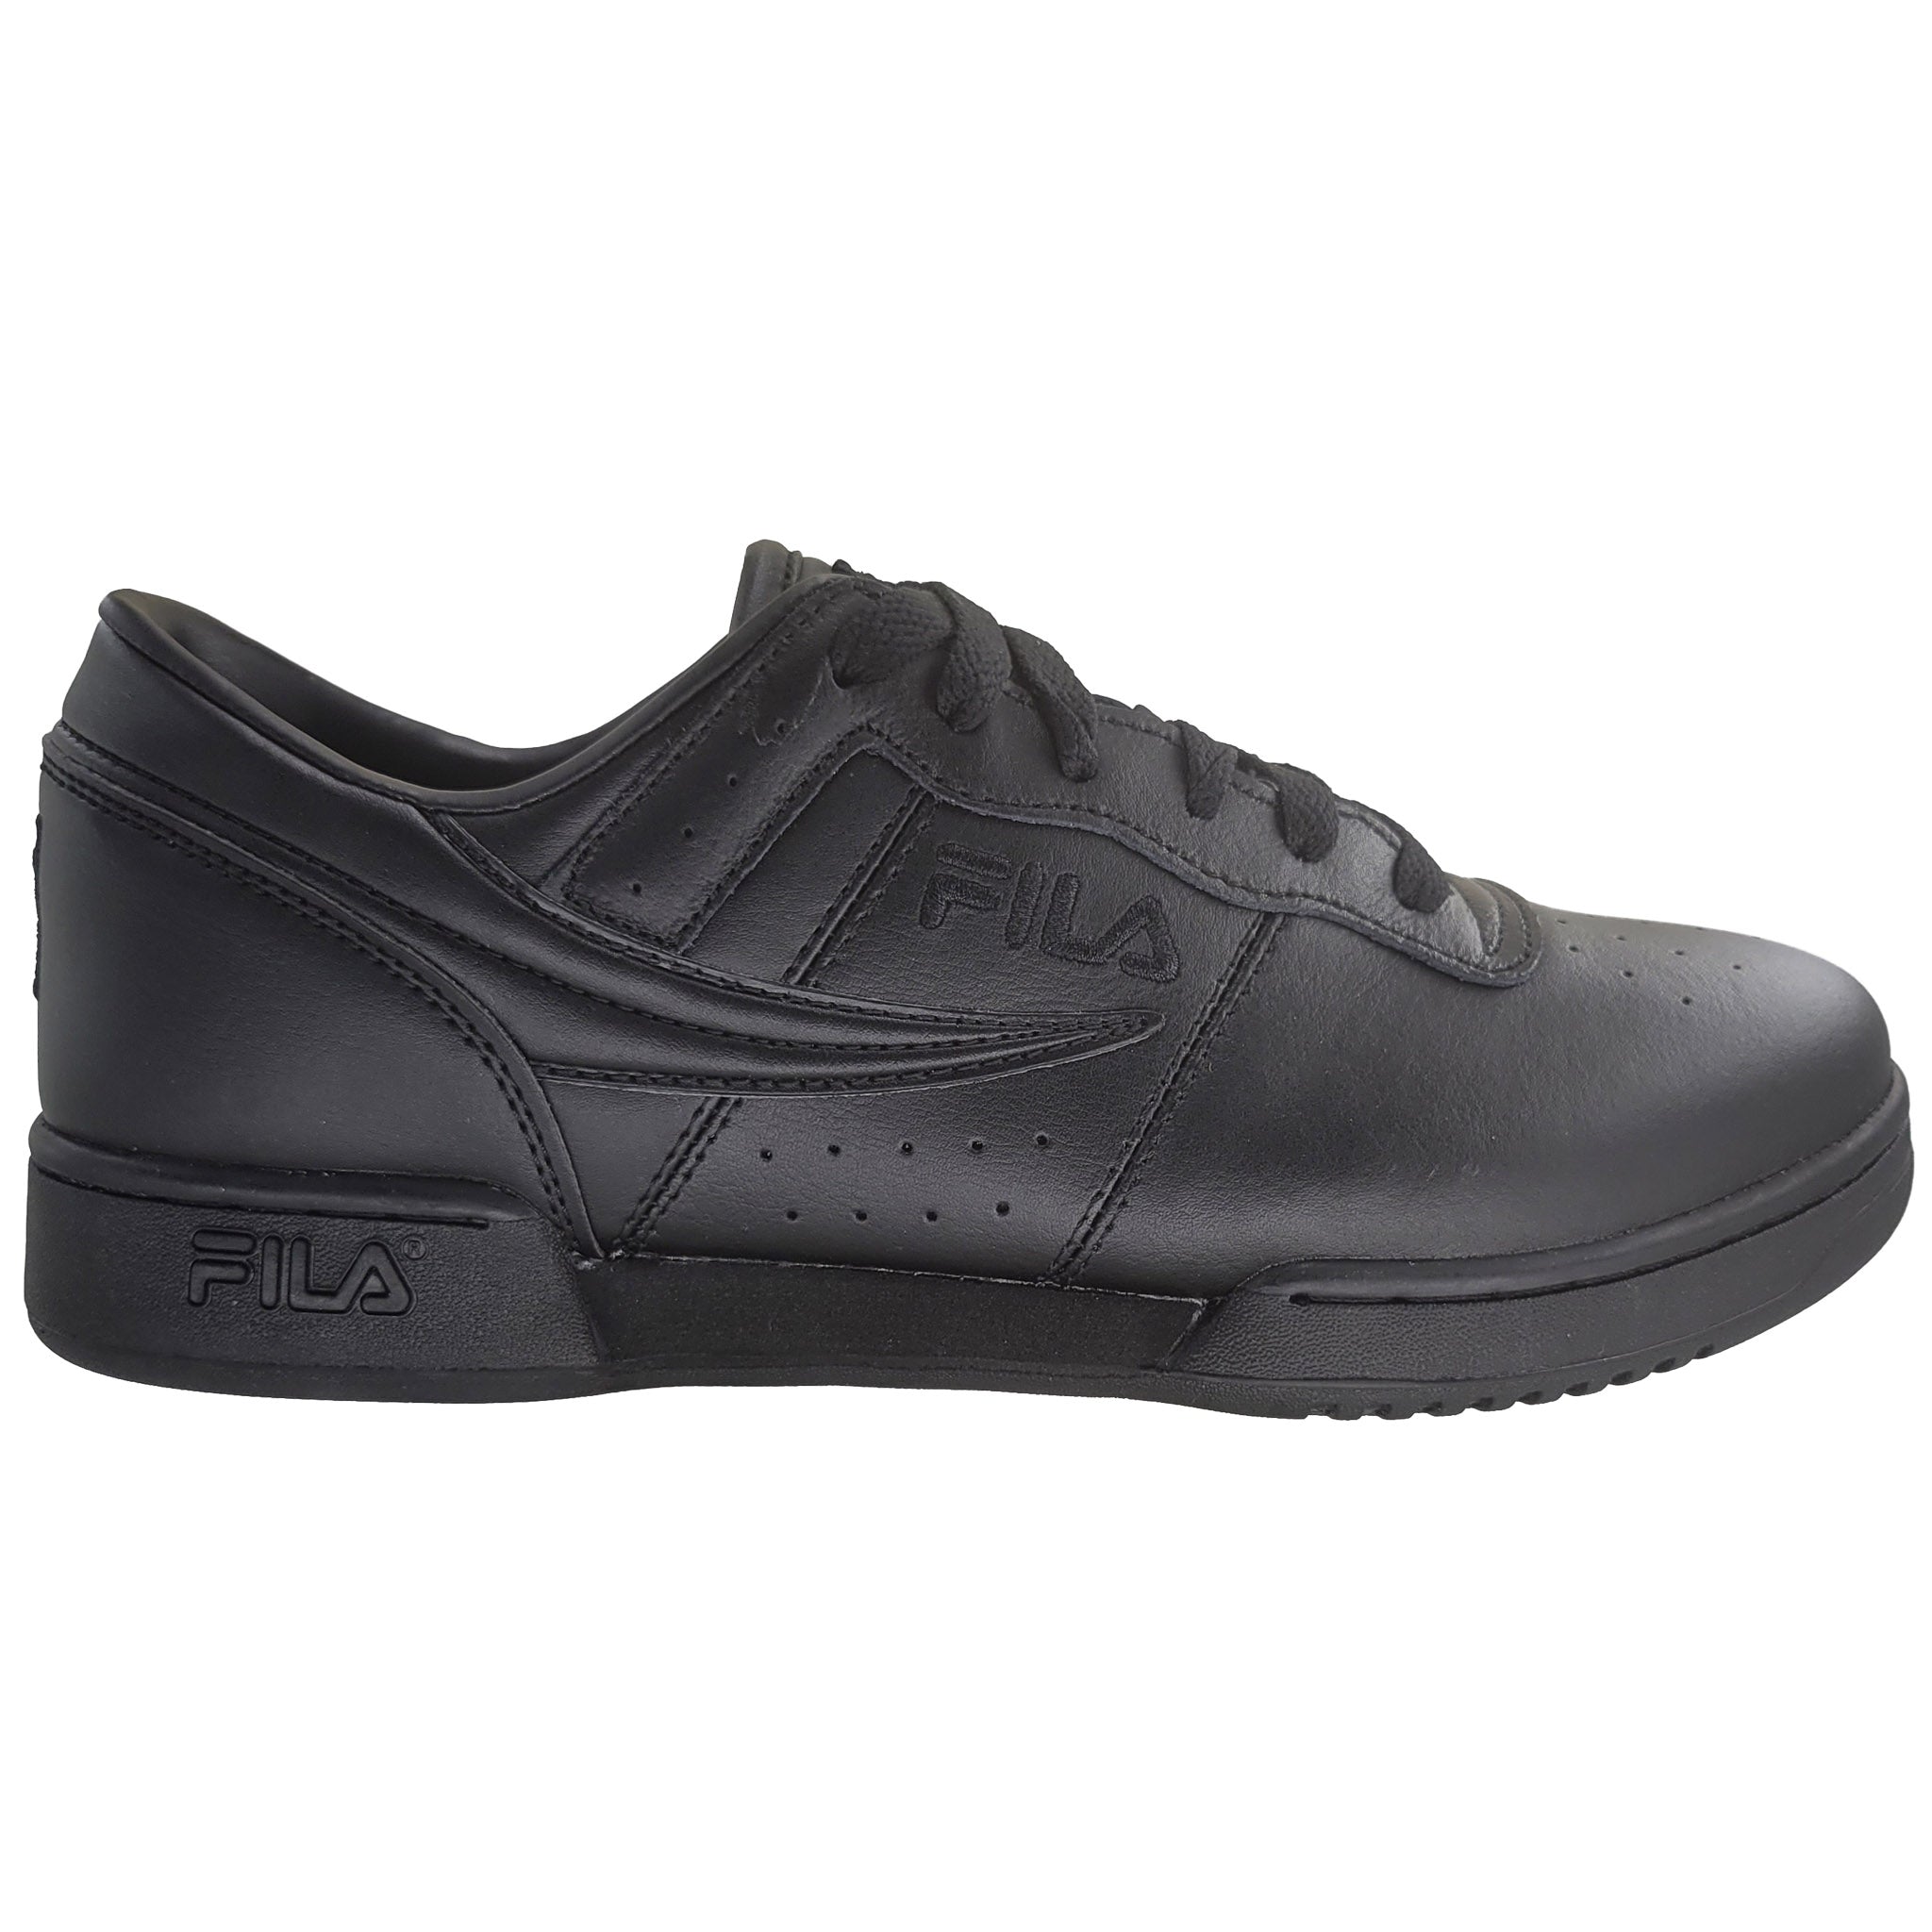 Fila Men's Original Fitness Casual Shoes – That Shoe Store and More